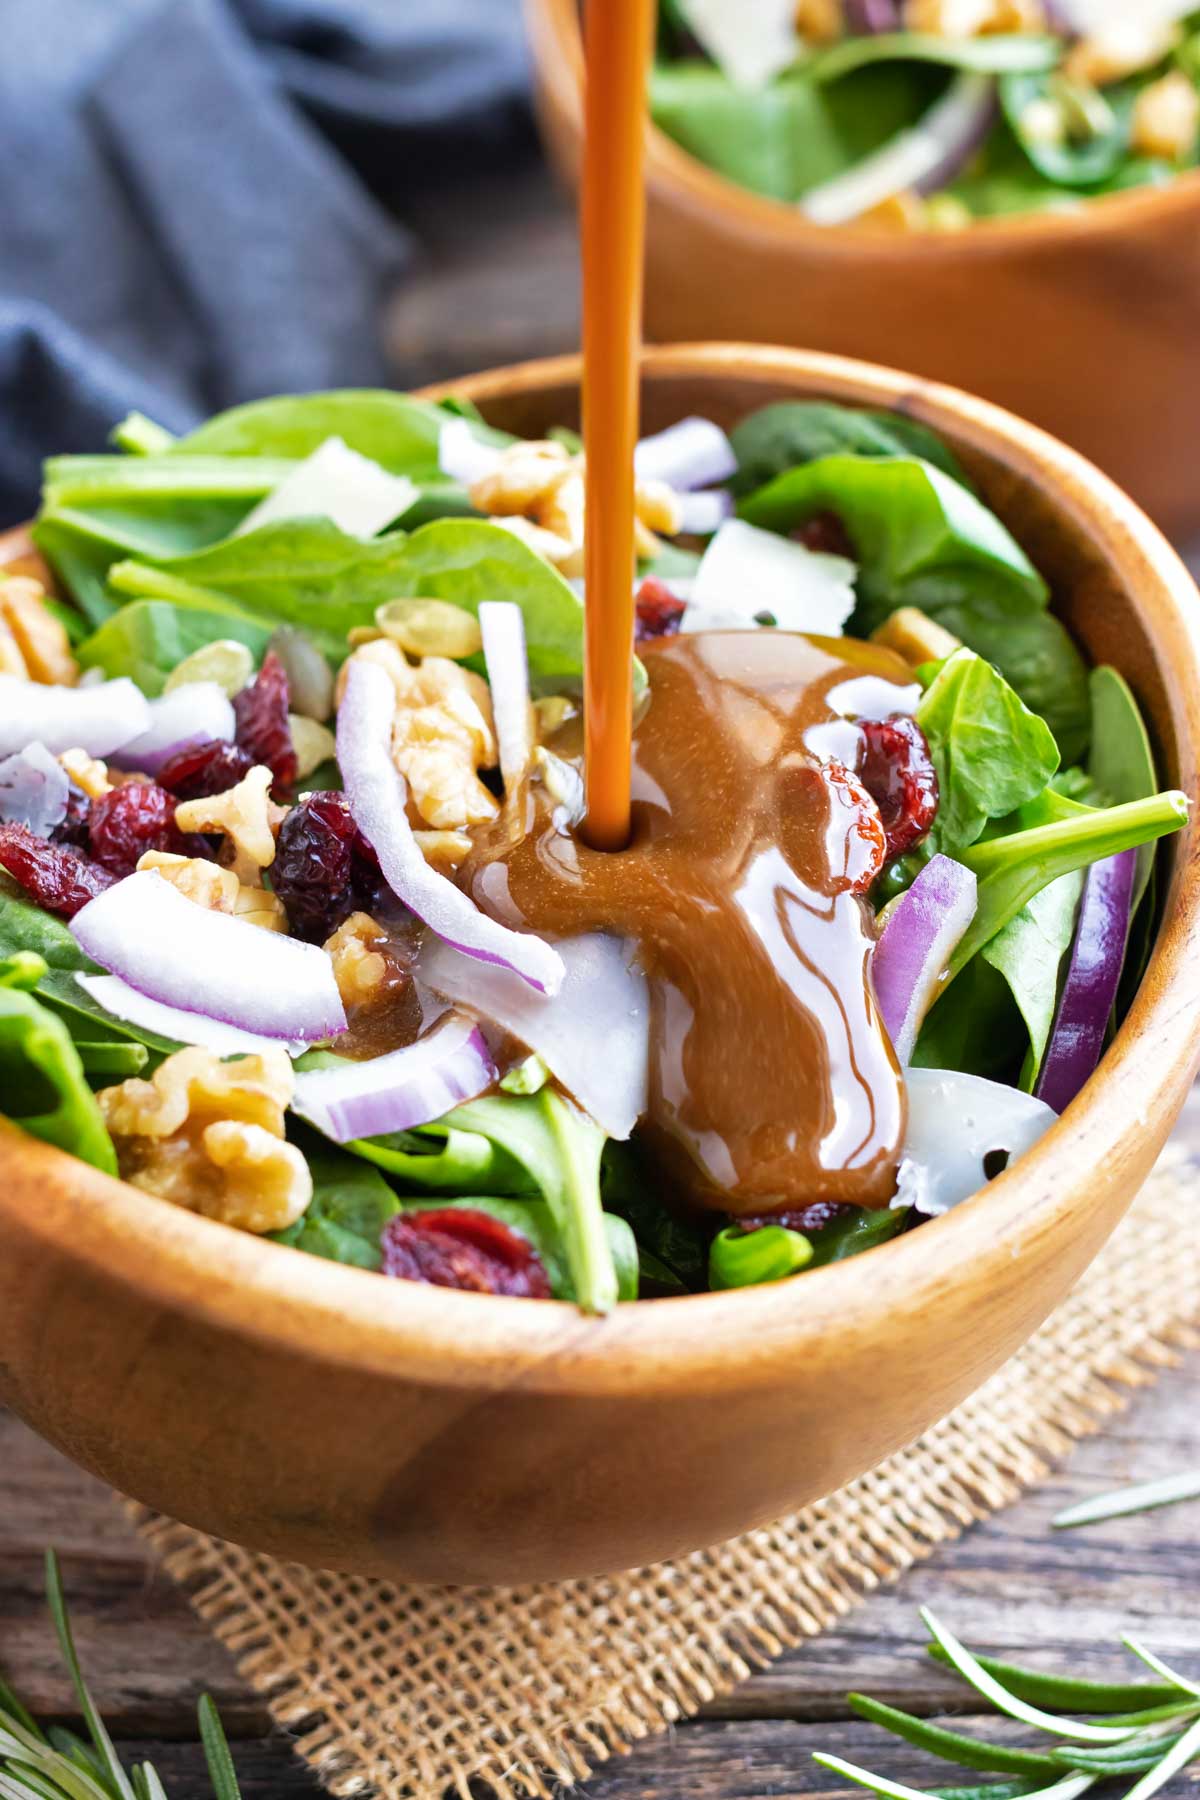 A healthy and easy balsamic vinaigrette dressing being poured onto a spinach salad with cranberries.